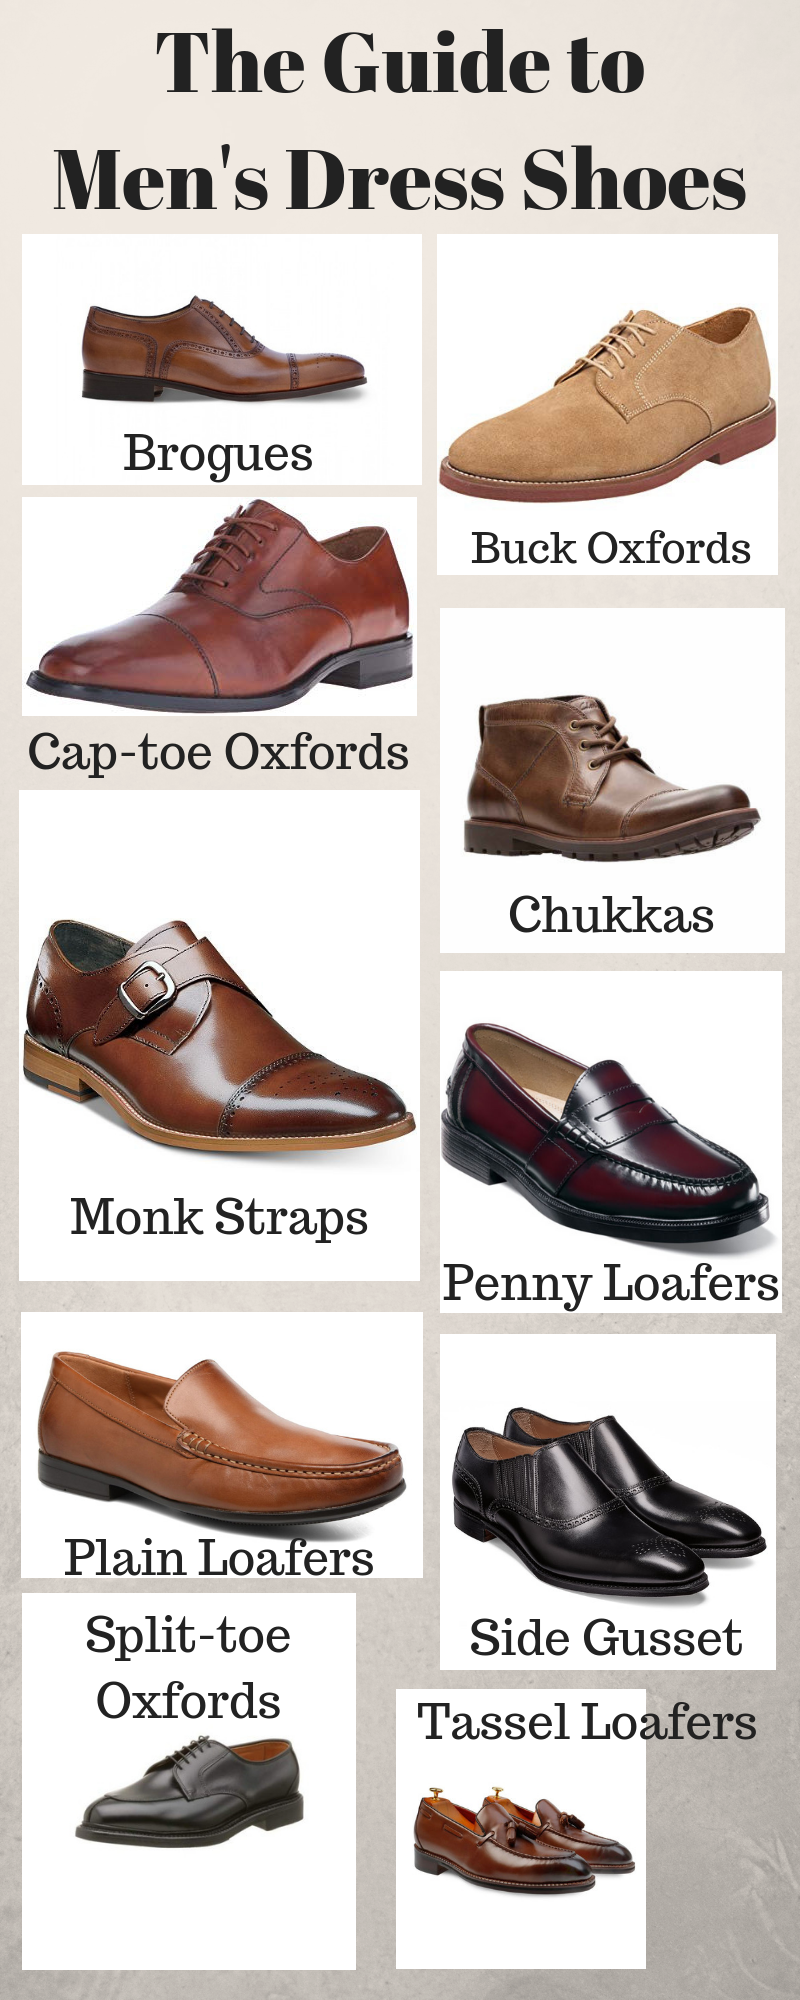 Guide to Men’s Dress Shoes – What shoes should you wear? – The Guide to ...